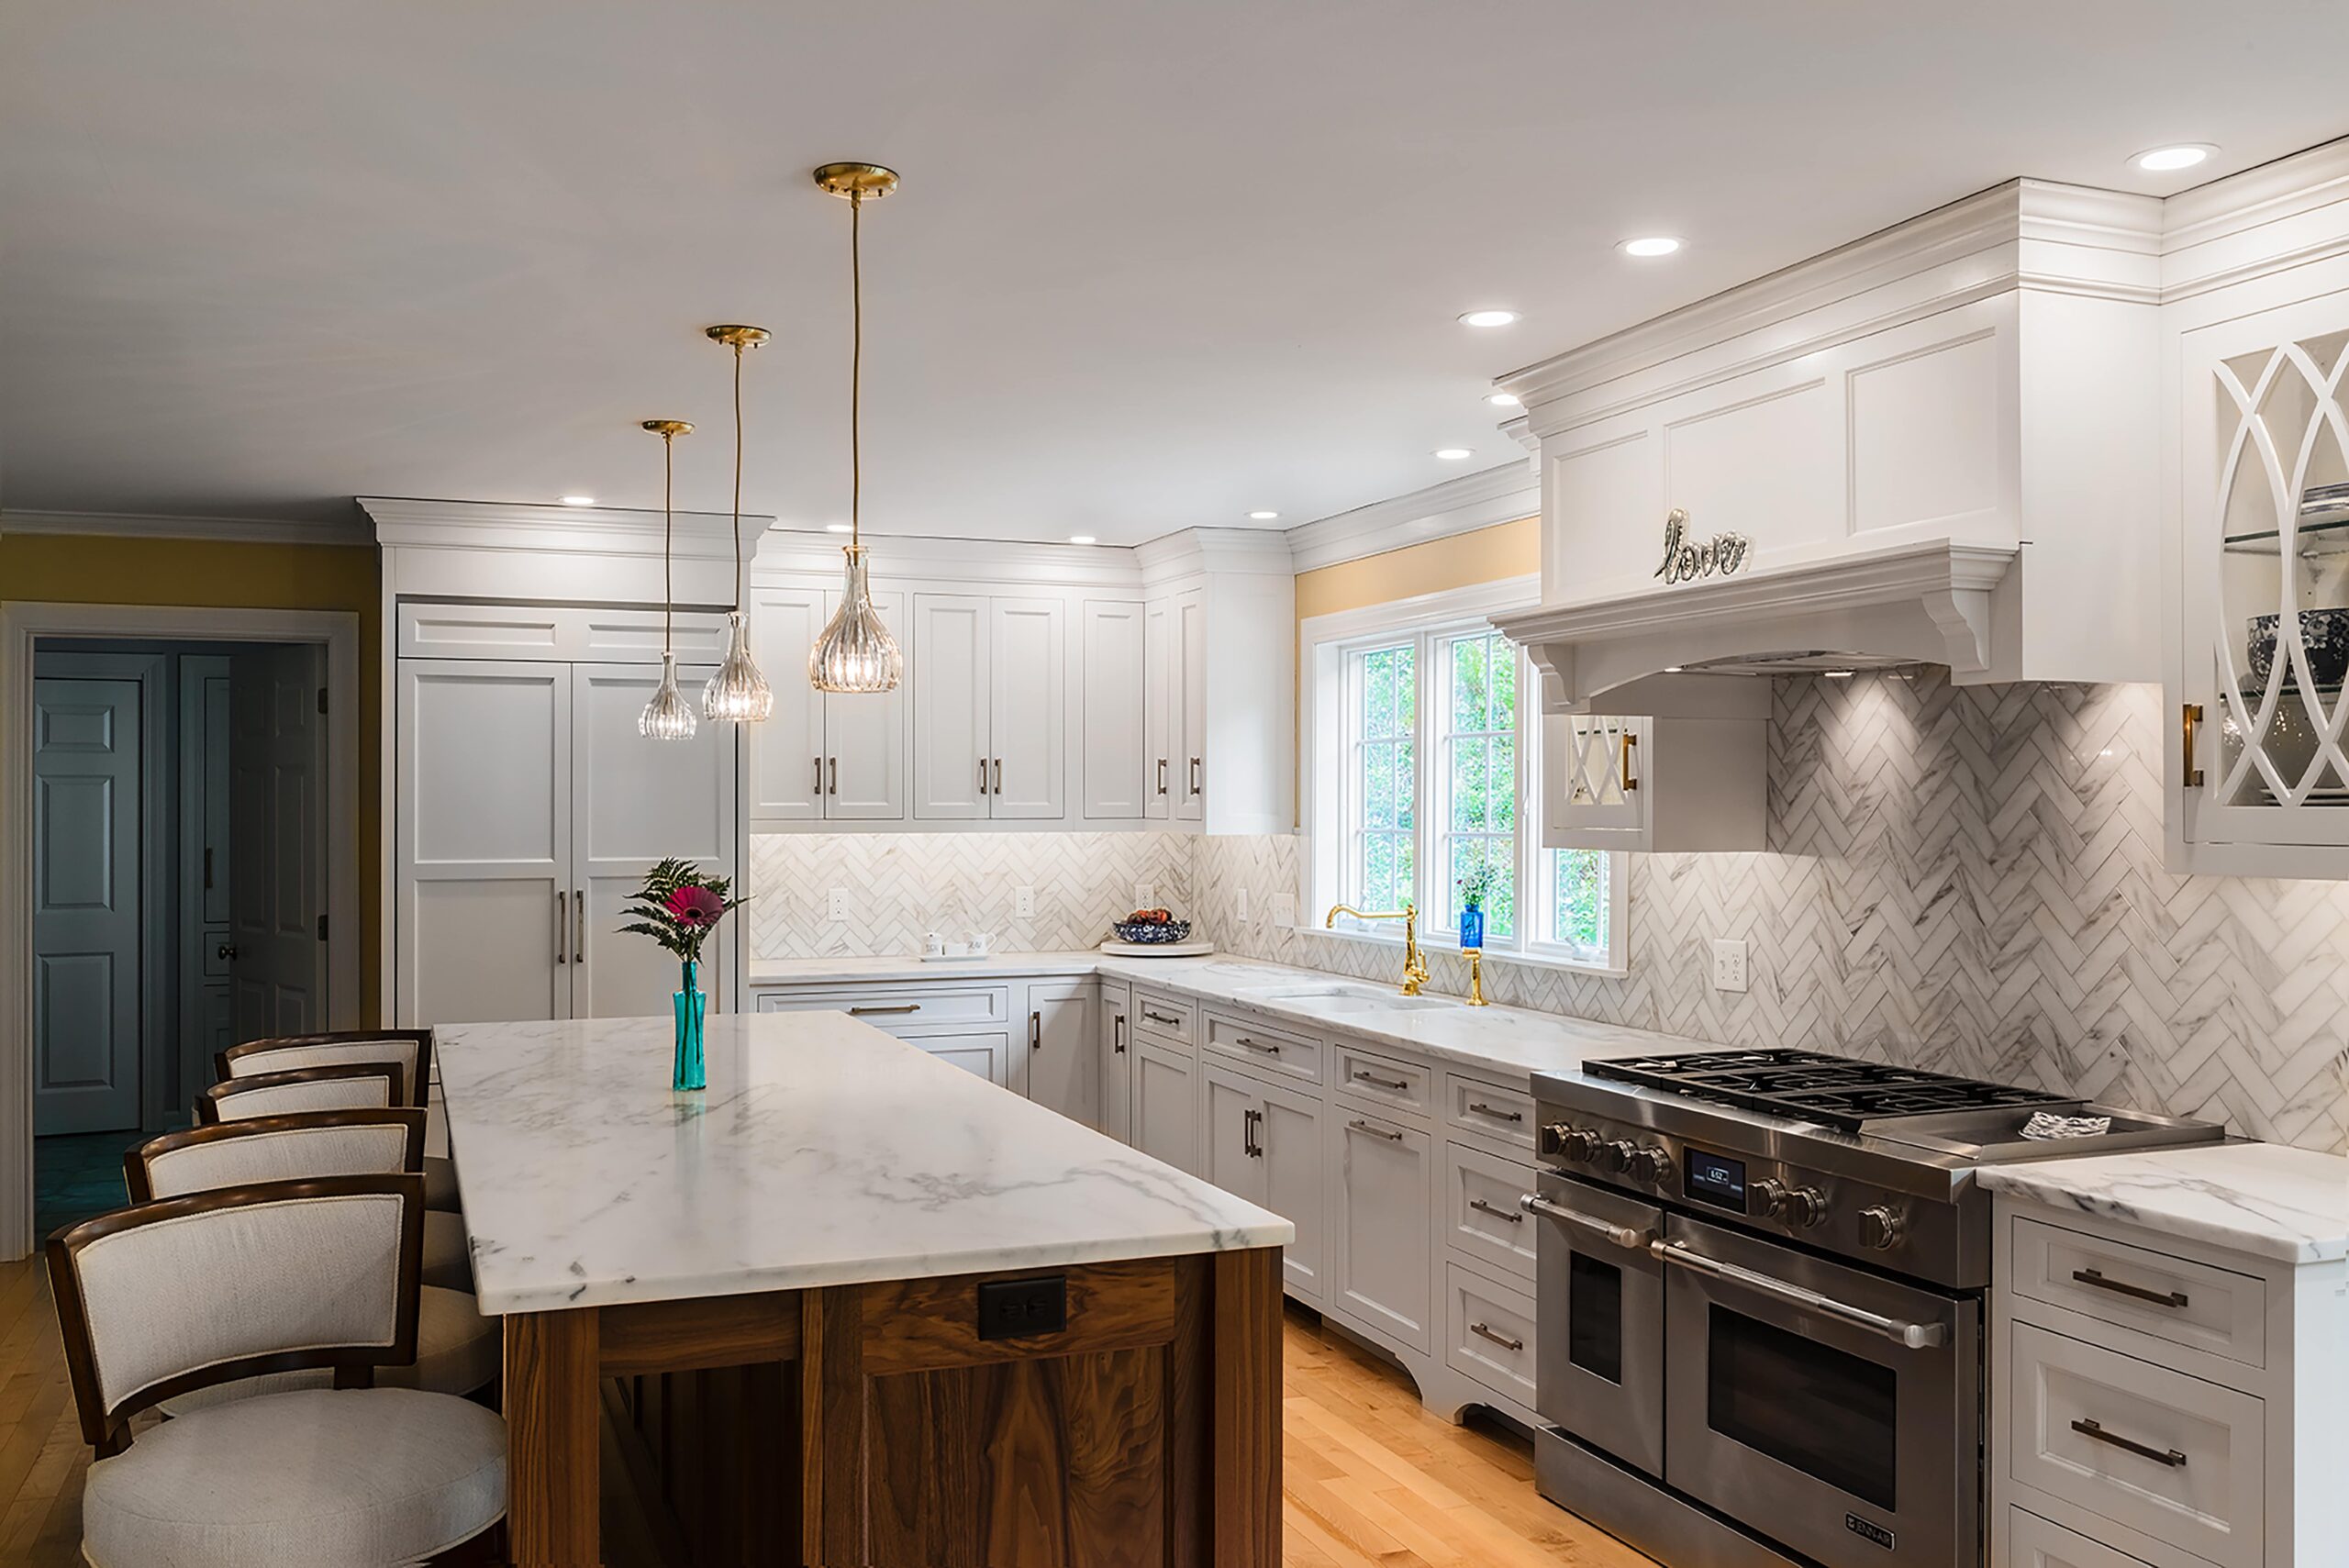 Remodeled kitchen with white cabinets and a marble kitchen island. Herringbone tile backsplash and recessed lighting.